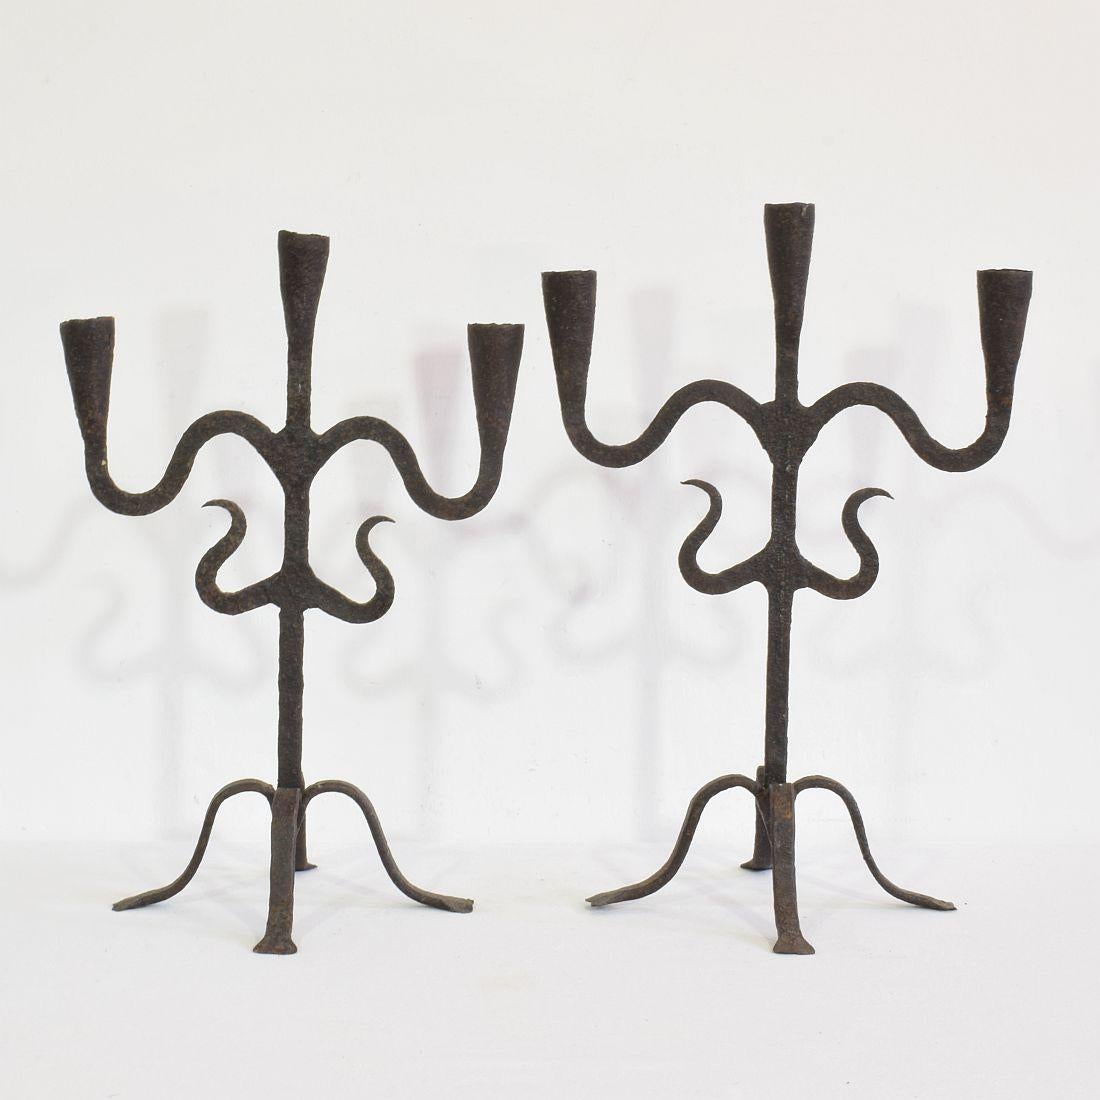 Spanish Pair of 18th-19th Century Hand-Forged Iron Candleholders